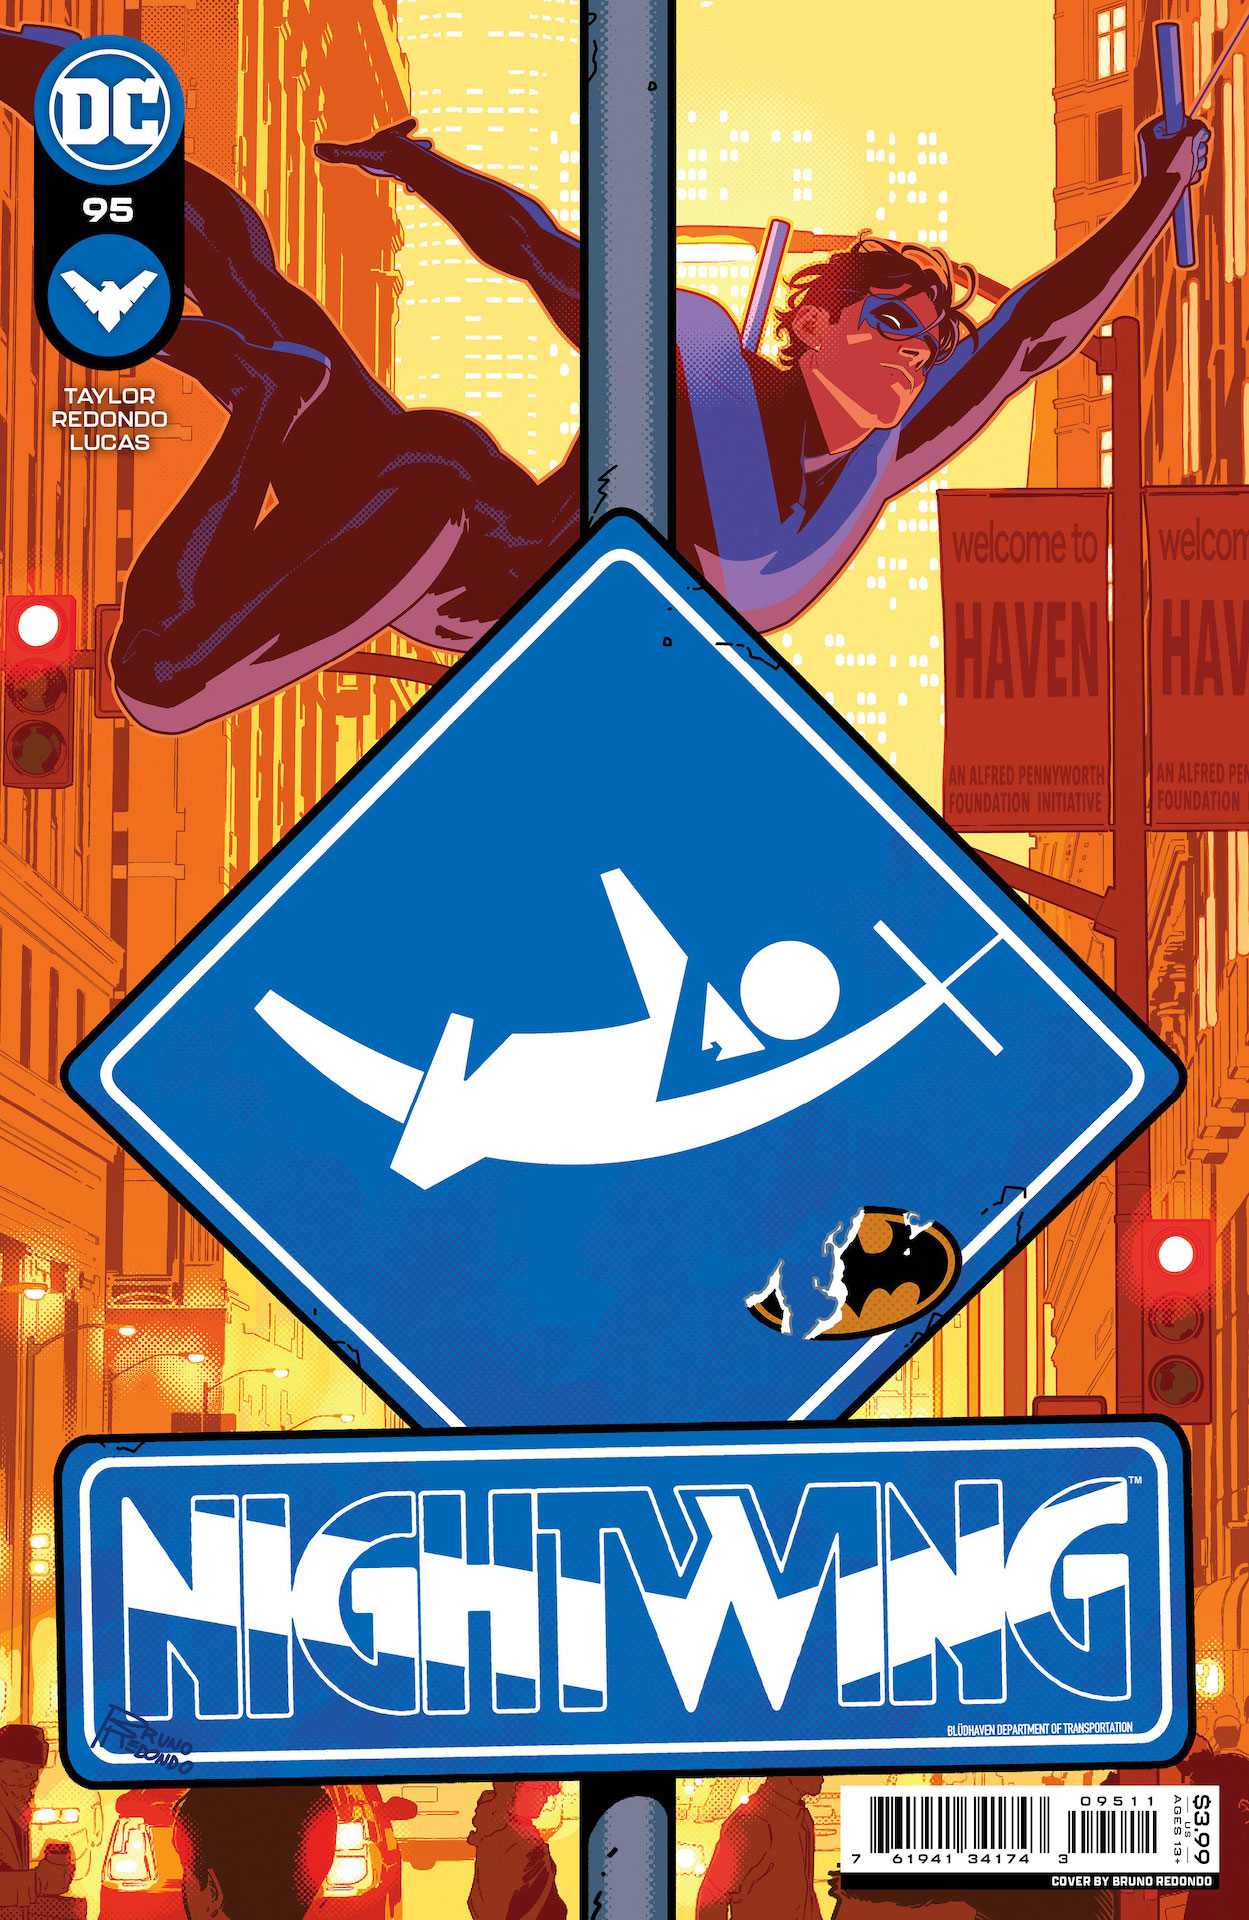 DC Preview: Nightwing #95